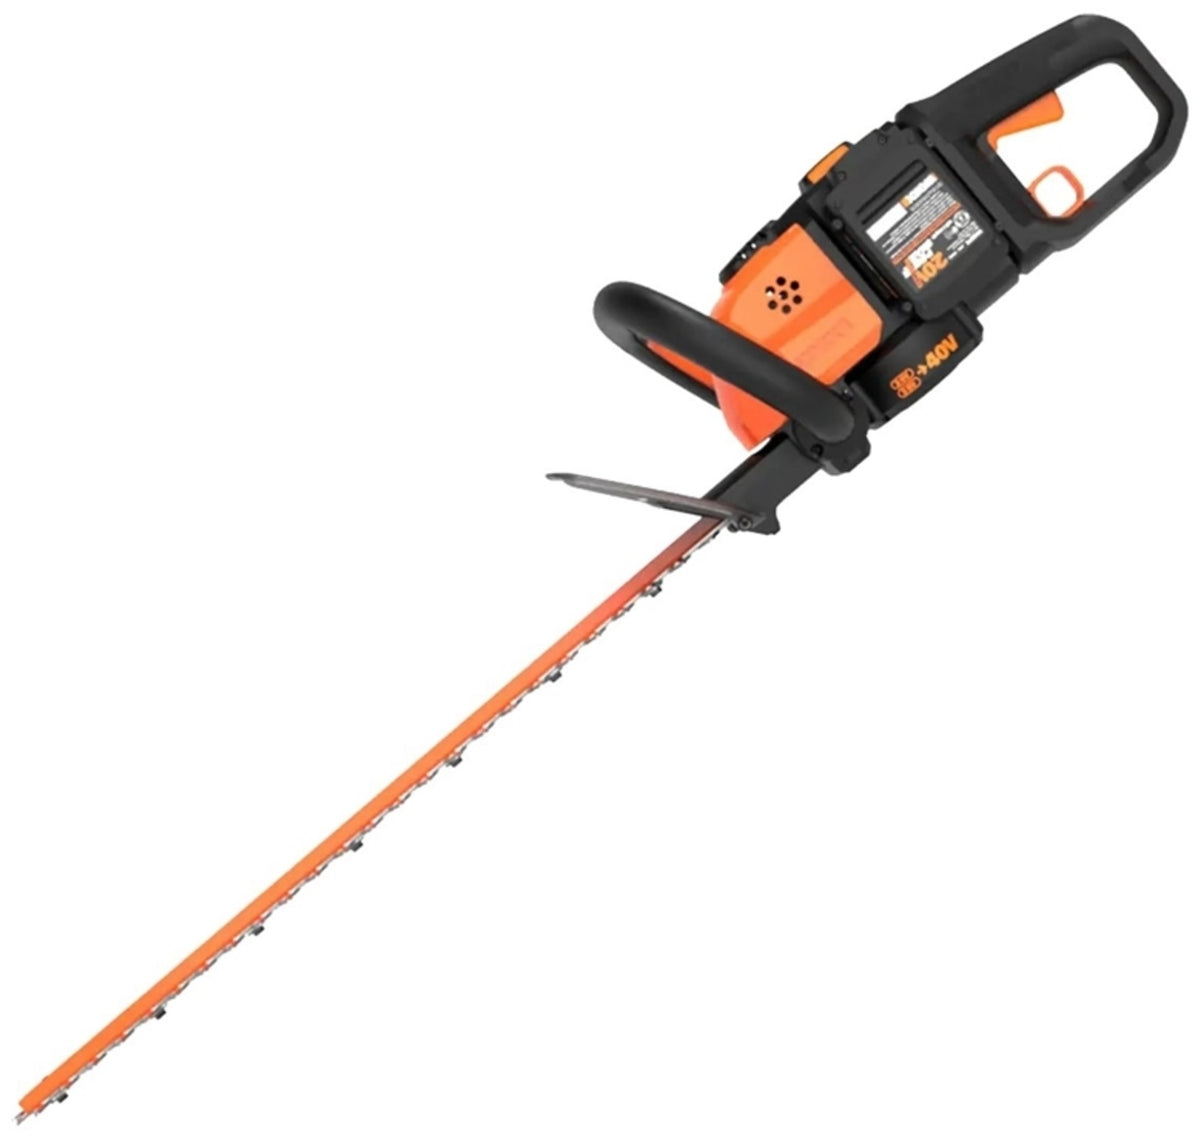 Worx WG284 Power Share Cordless Hedge Trimmer, 40 Volts